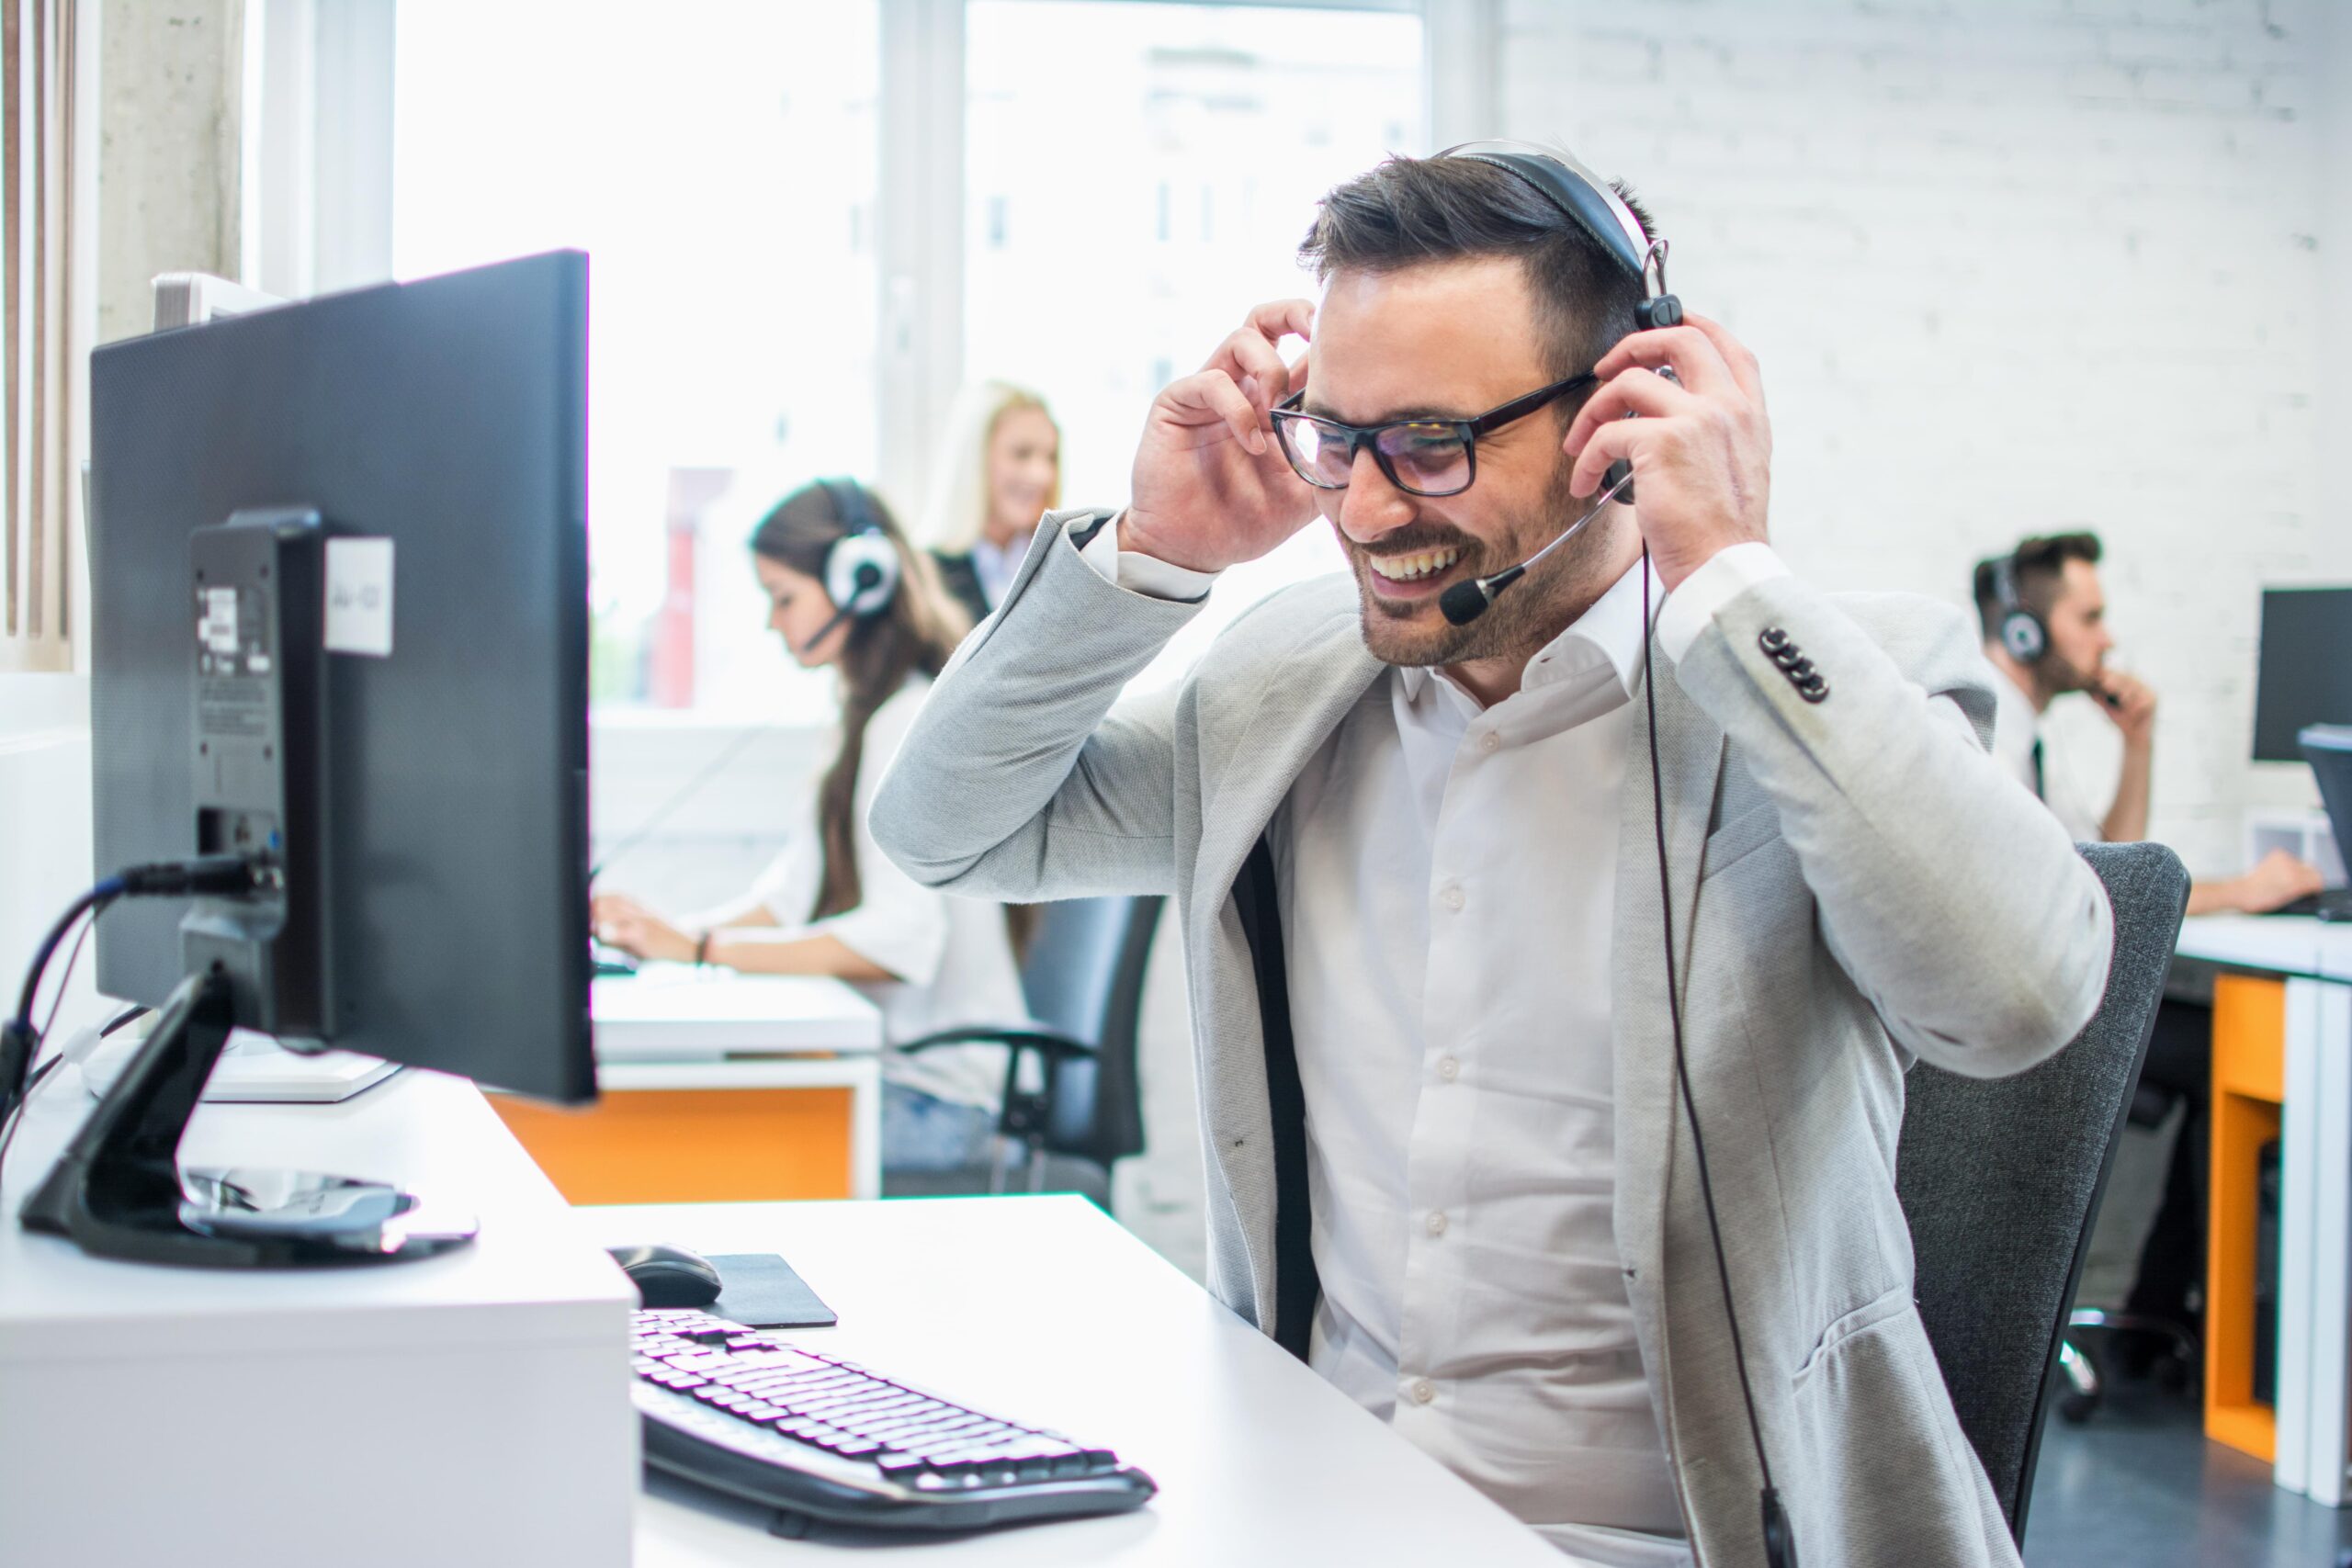 Telemarketing Doesn’t Have To Be Annoying — If You Do It Right